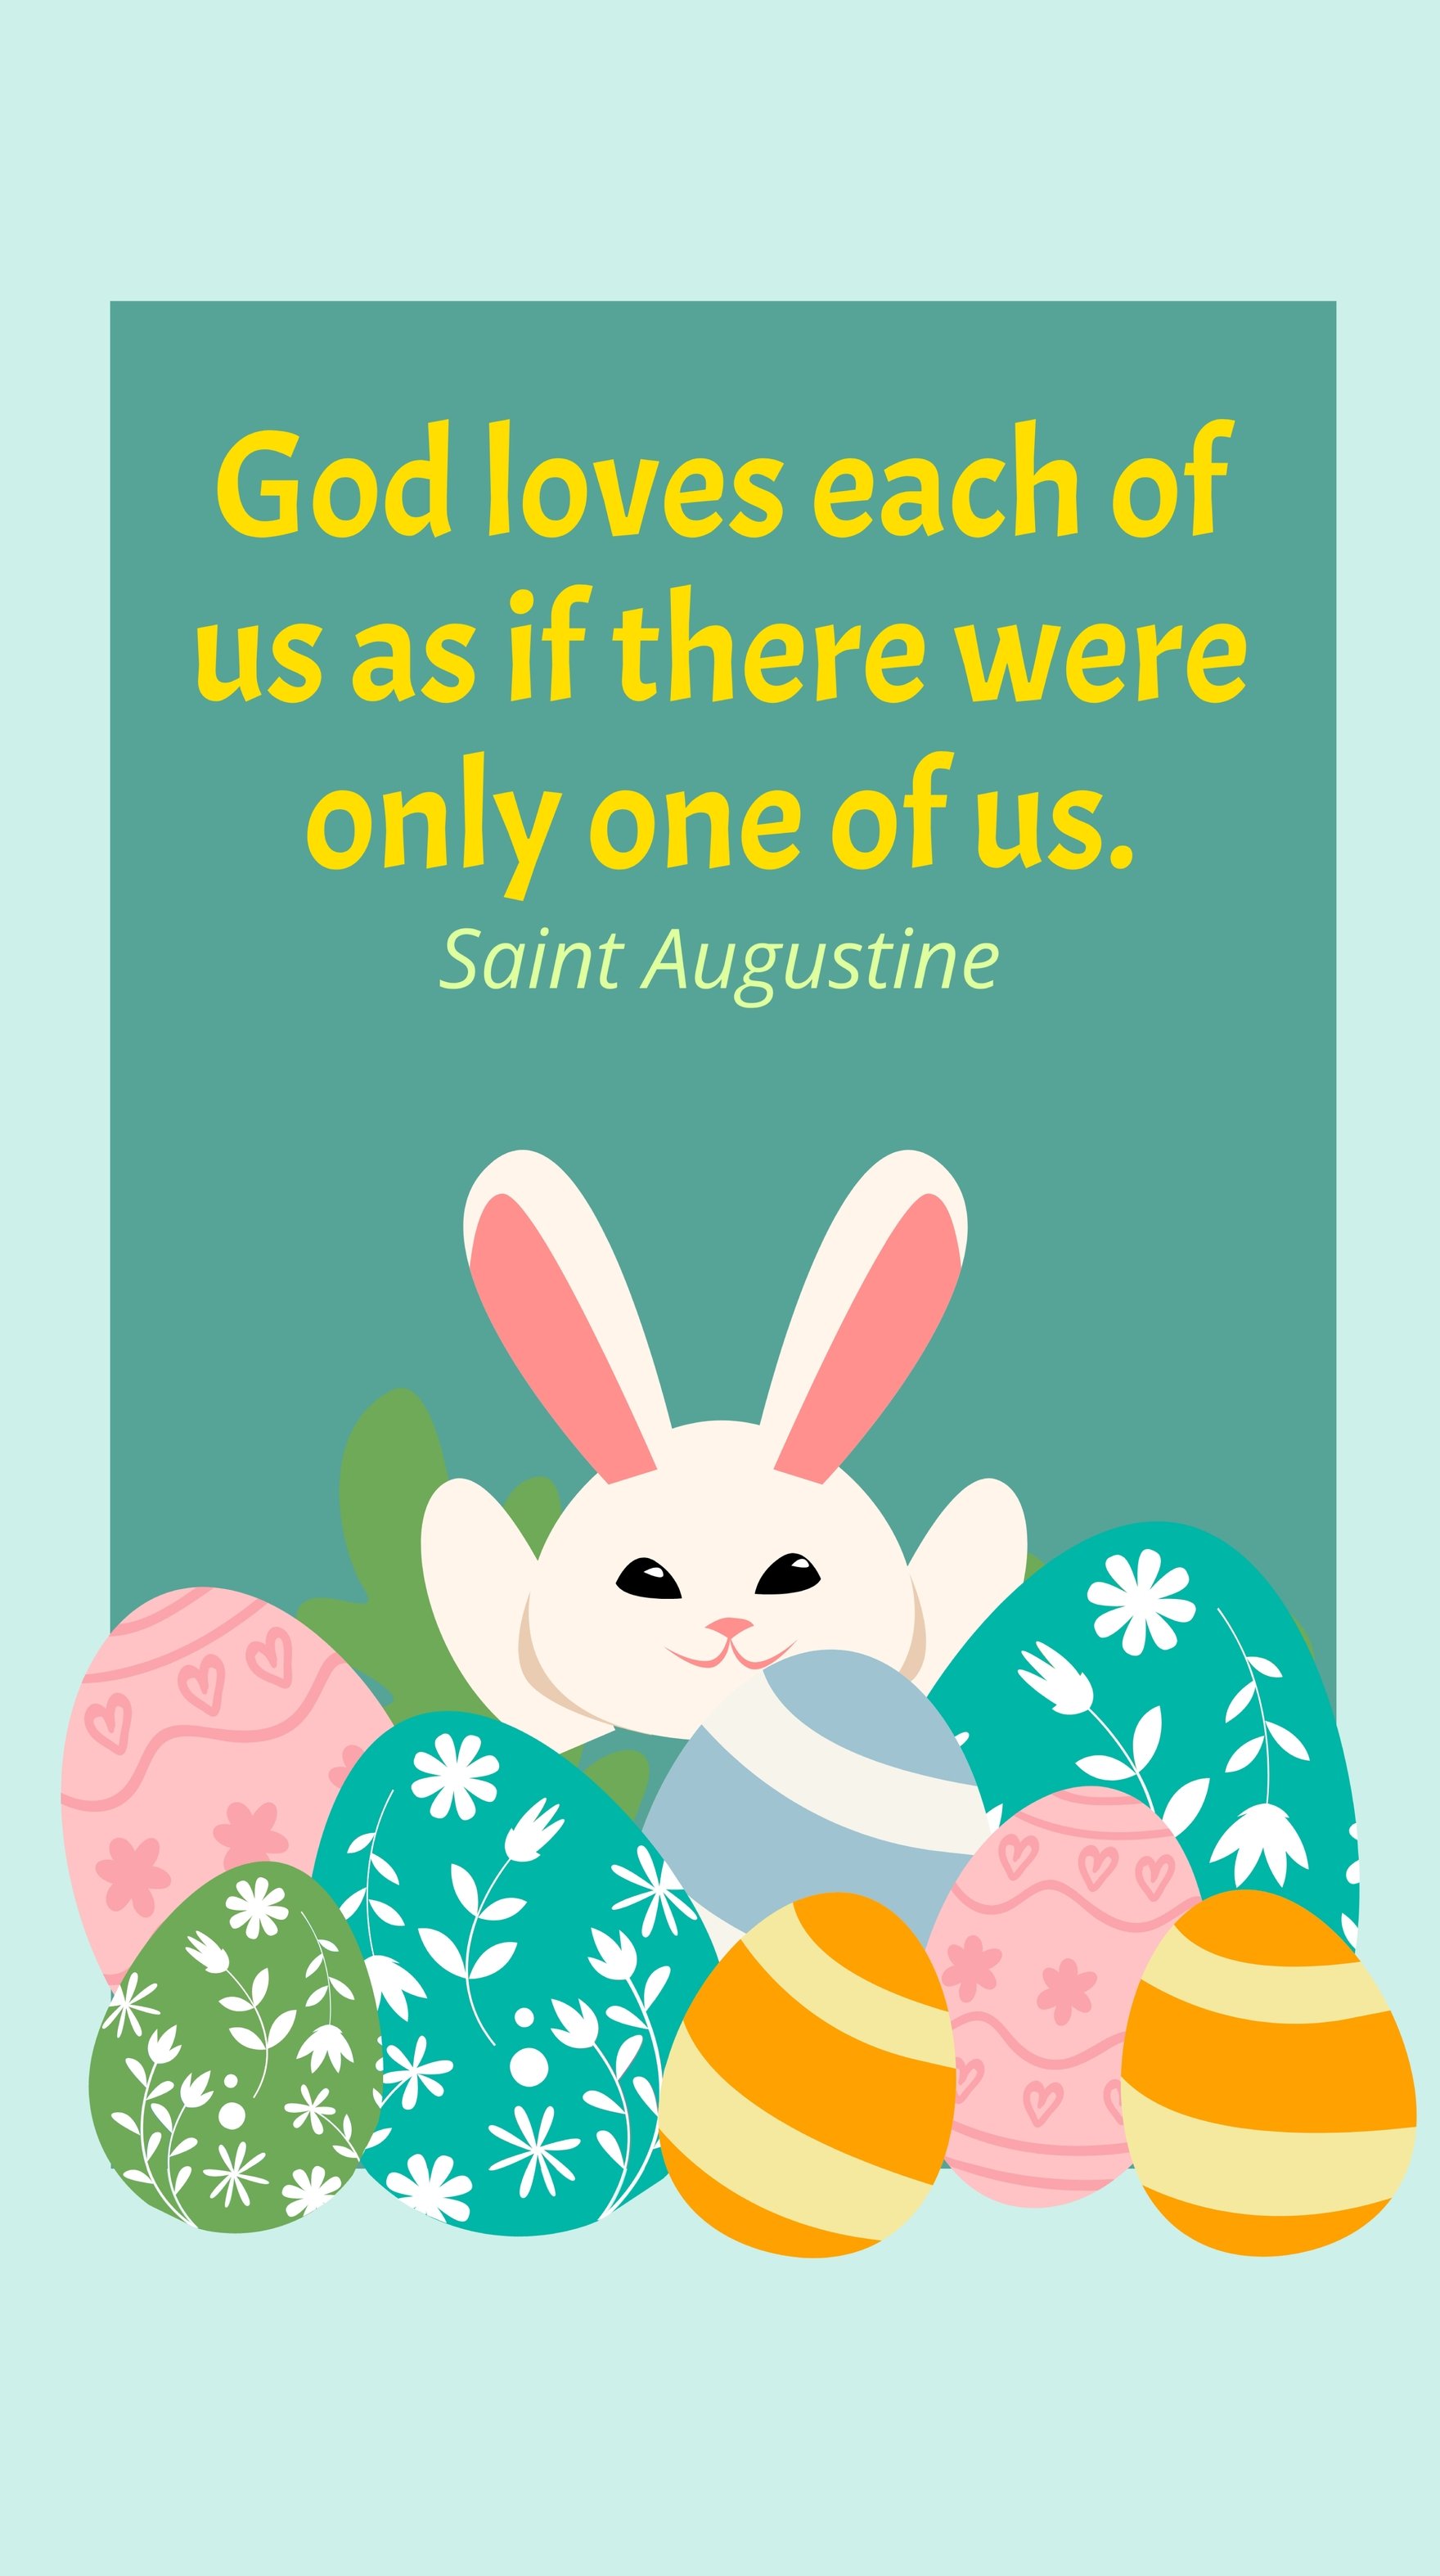 Free Saint Augustine - God loves each of us as if there were only one of us. in JPG